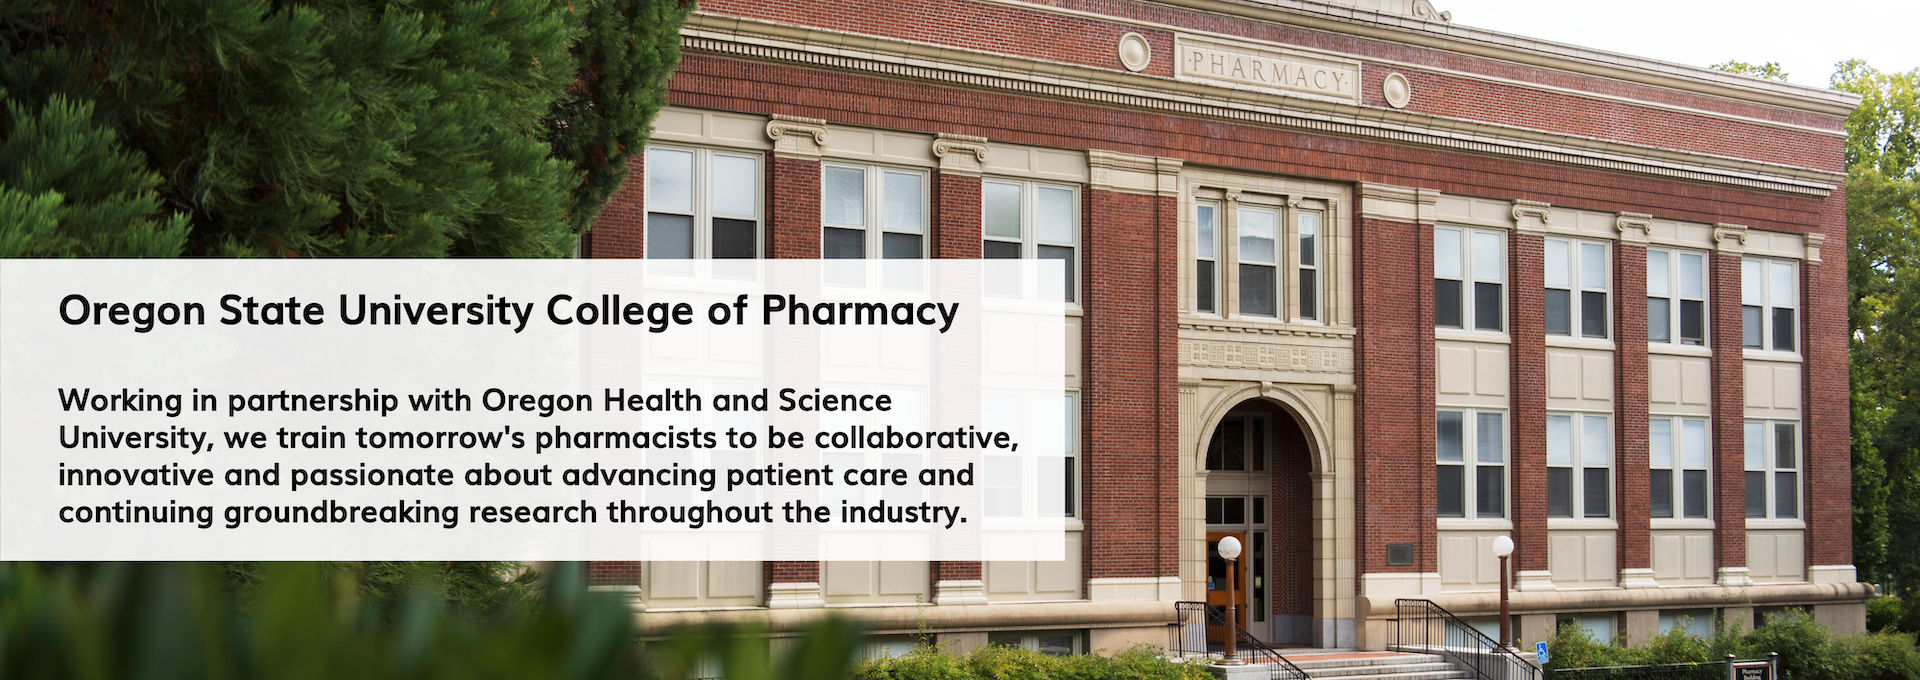 Welcome to the College of Pharmacy with a view of the west side of the building.